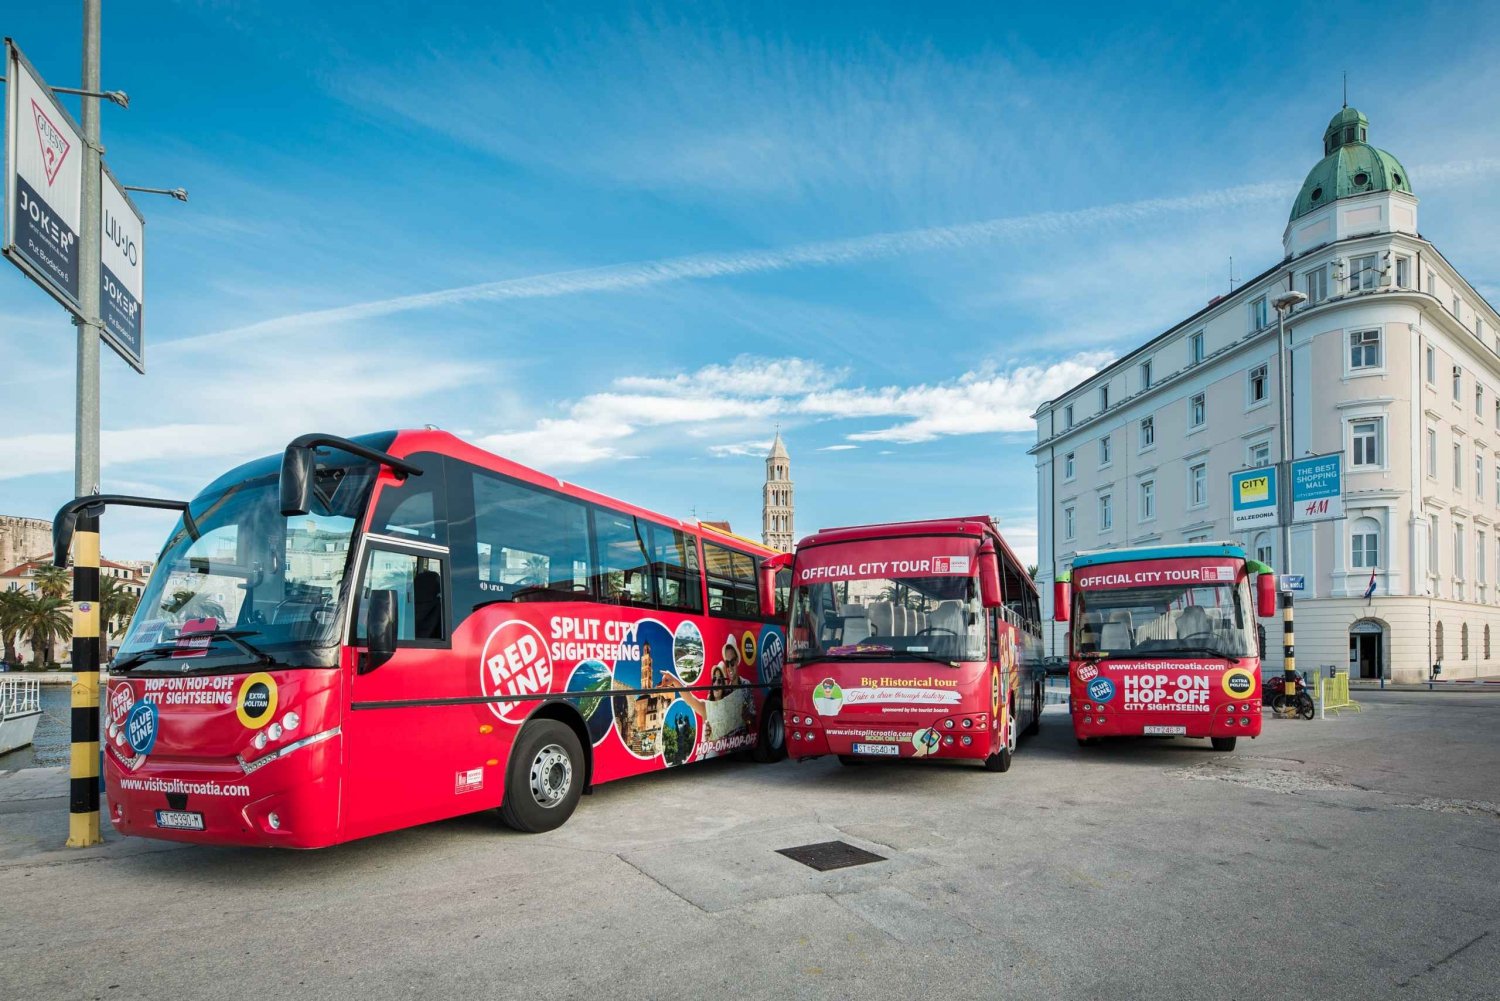 Split: Hop-on-Hop-off Bus Tour with Guided Walking Tours